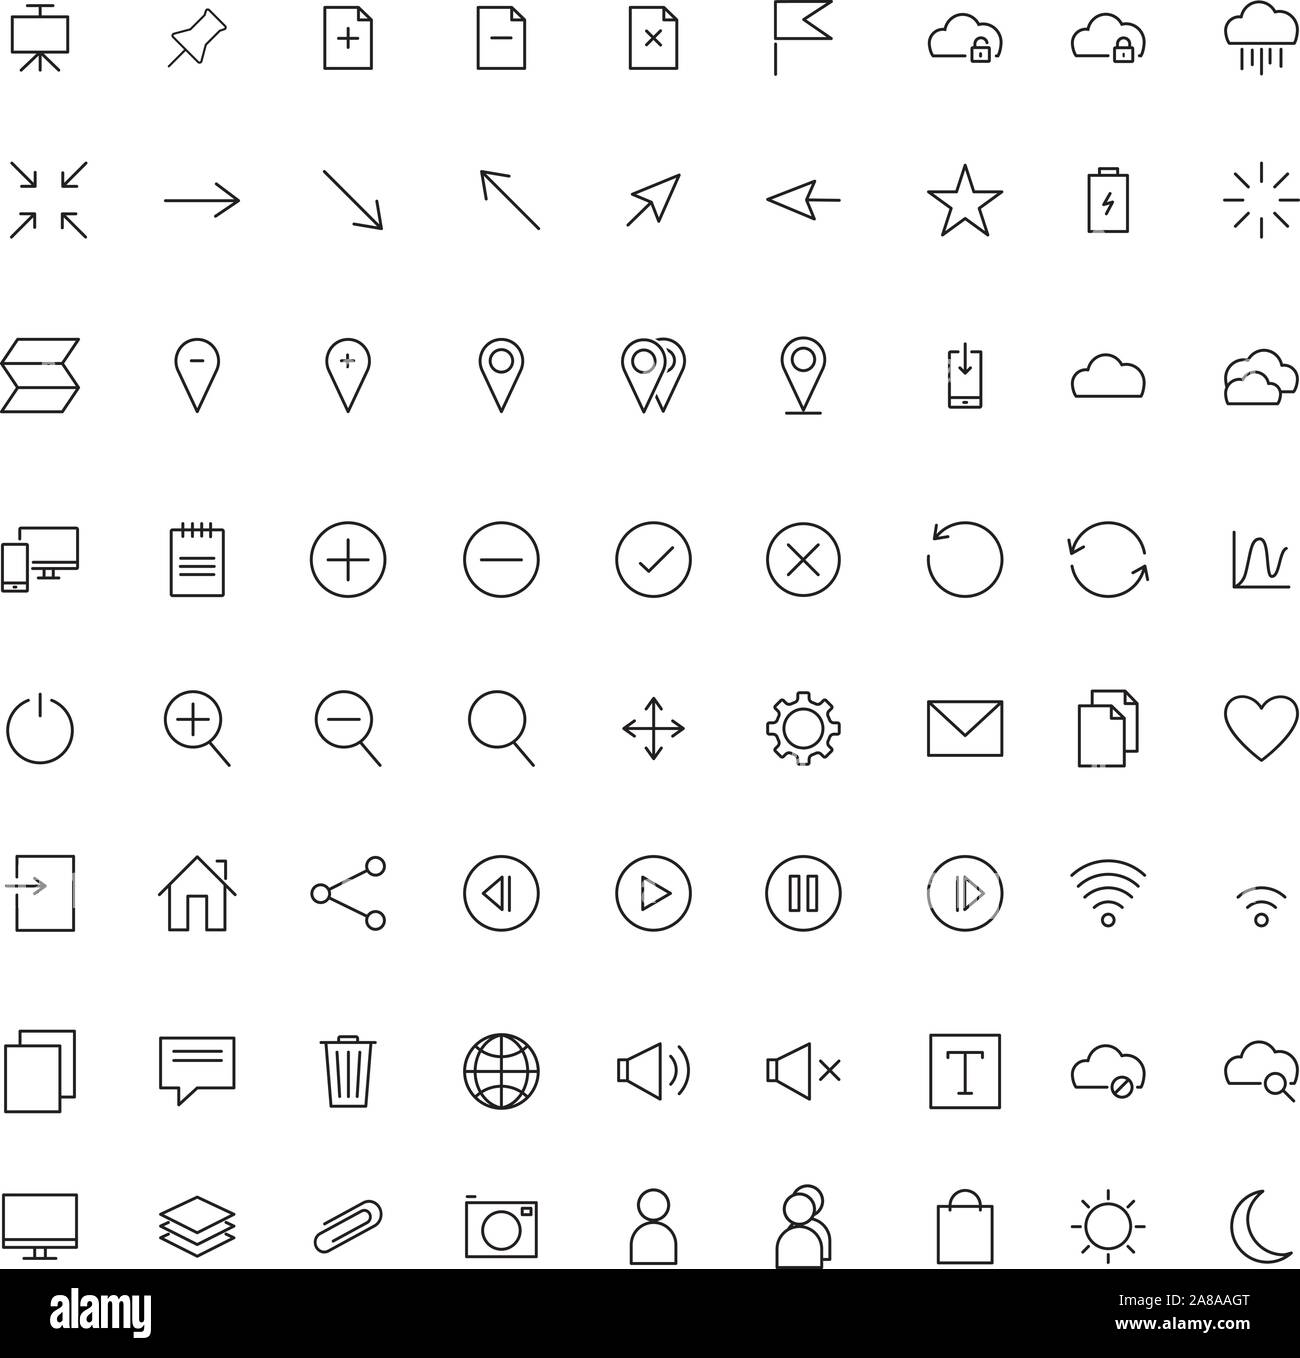 Vector collection of universal black flat icons for business, web, technology, communication, connectivity, music, media, finance, environment and  mo Stock Vector